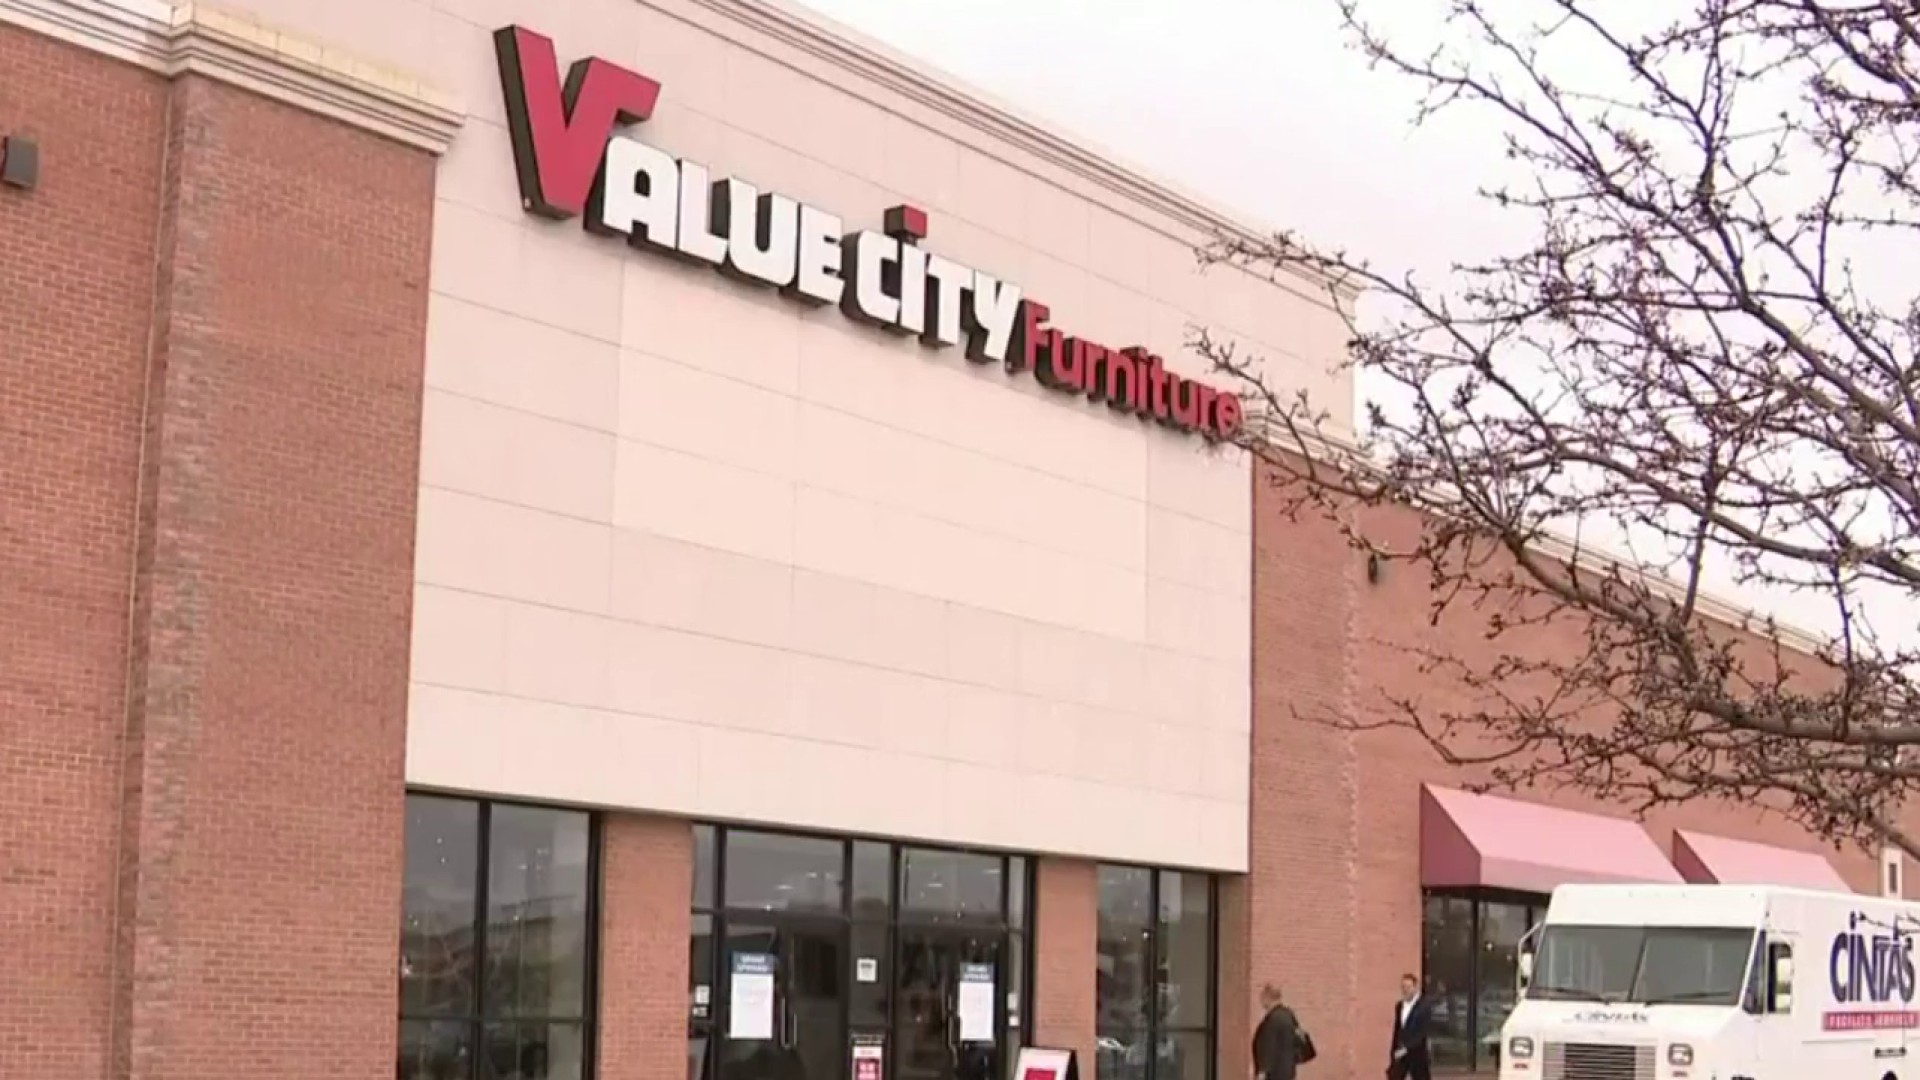 Value City Furniture Reaches Out To Art Van Employees Looking For Work